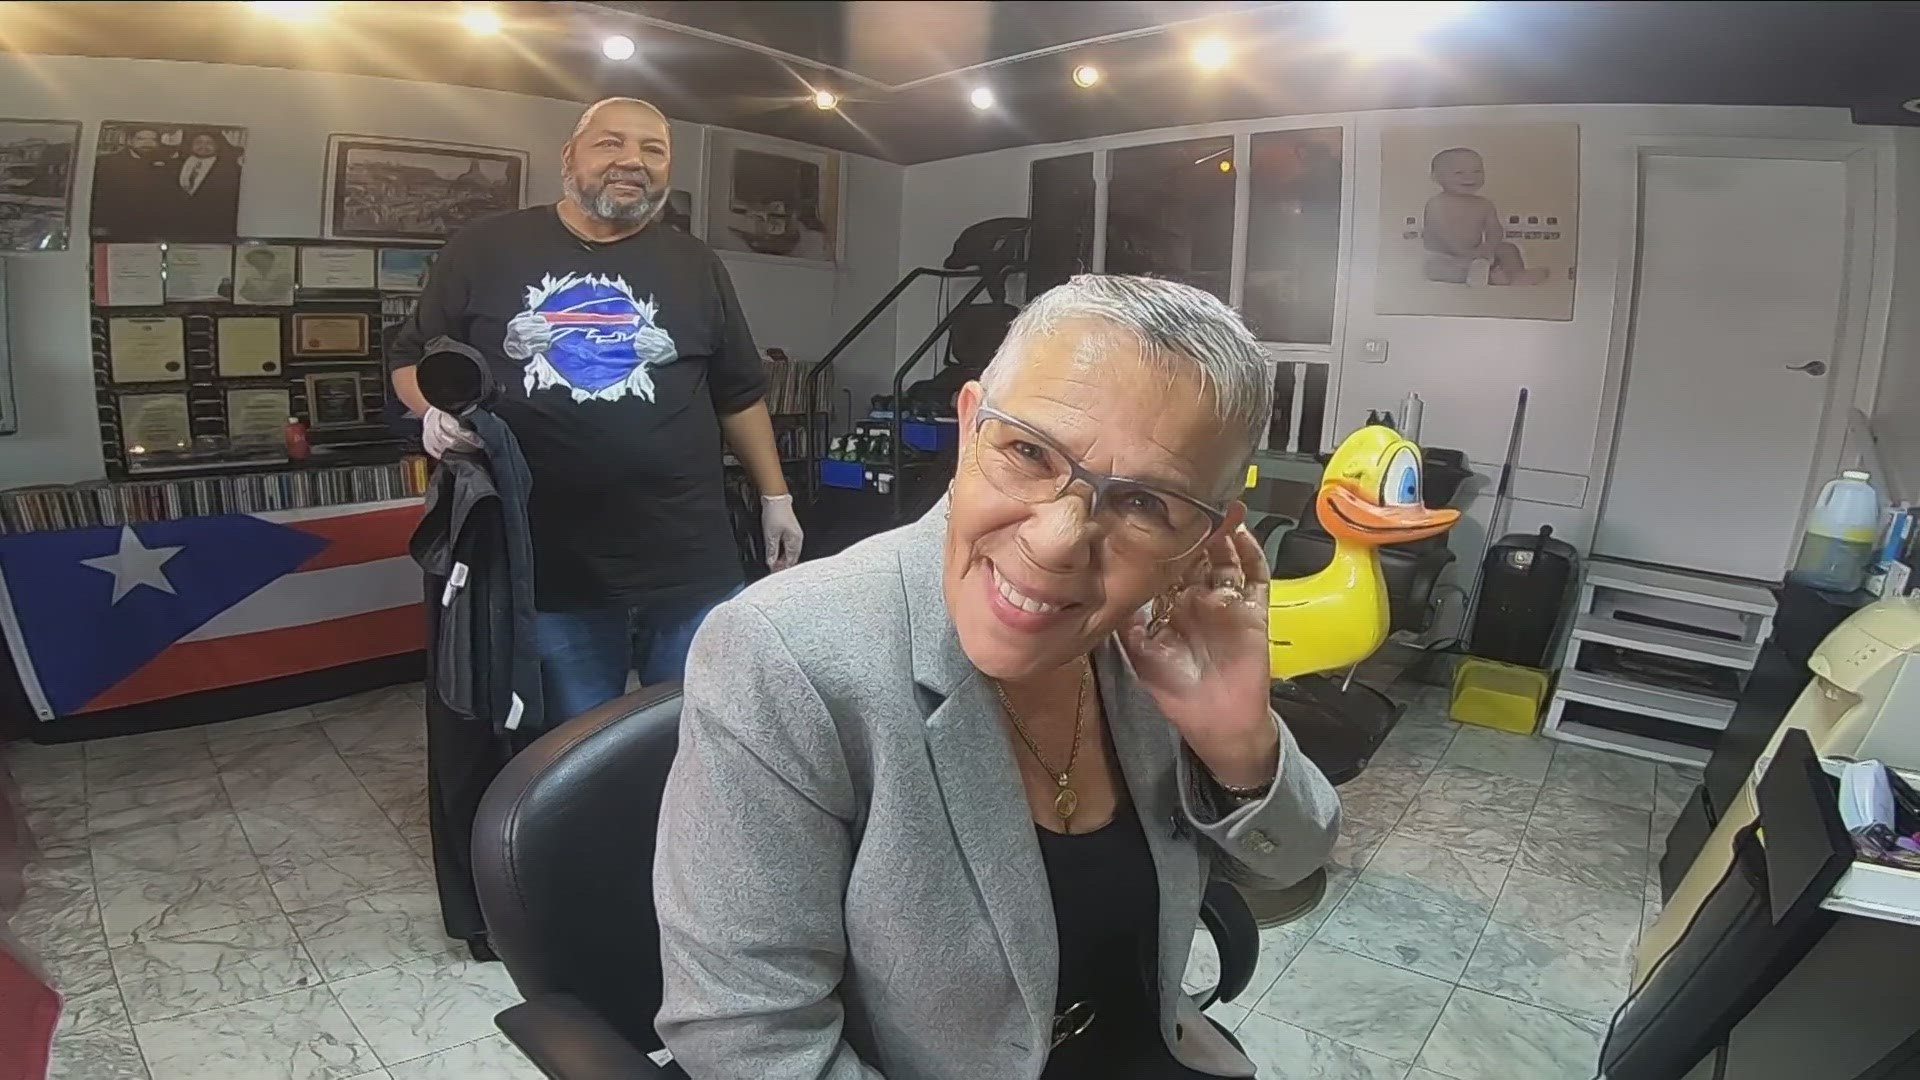 Hispanic Heritage Month: Hairstylist carries Puerto Rican Pride in WNY